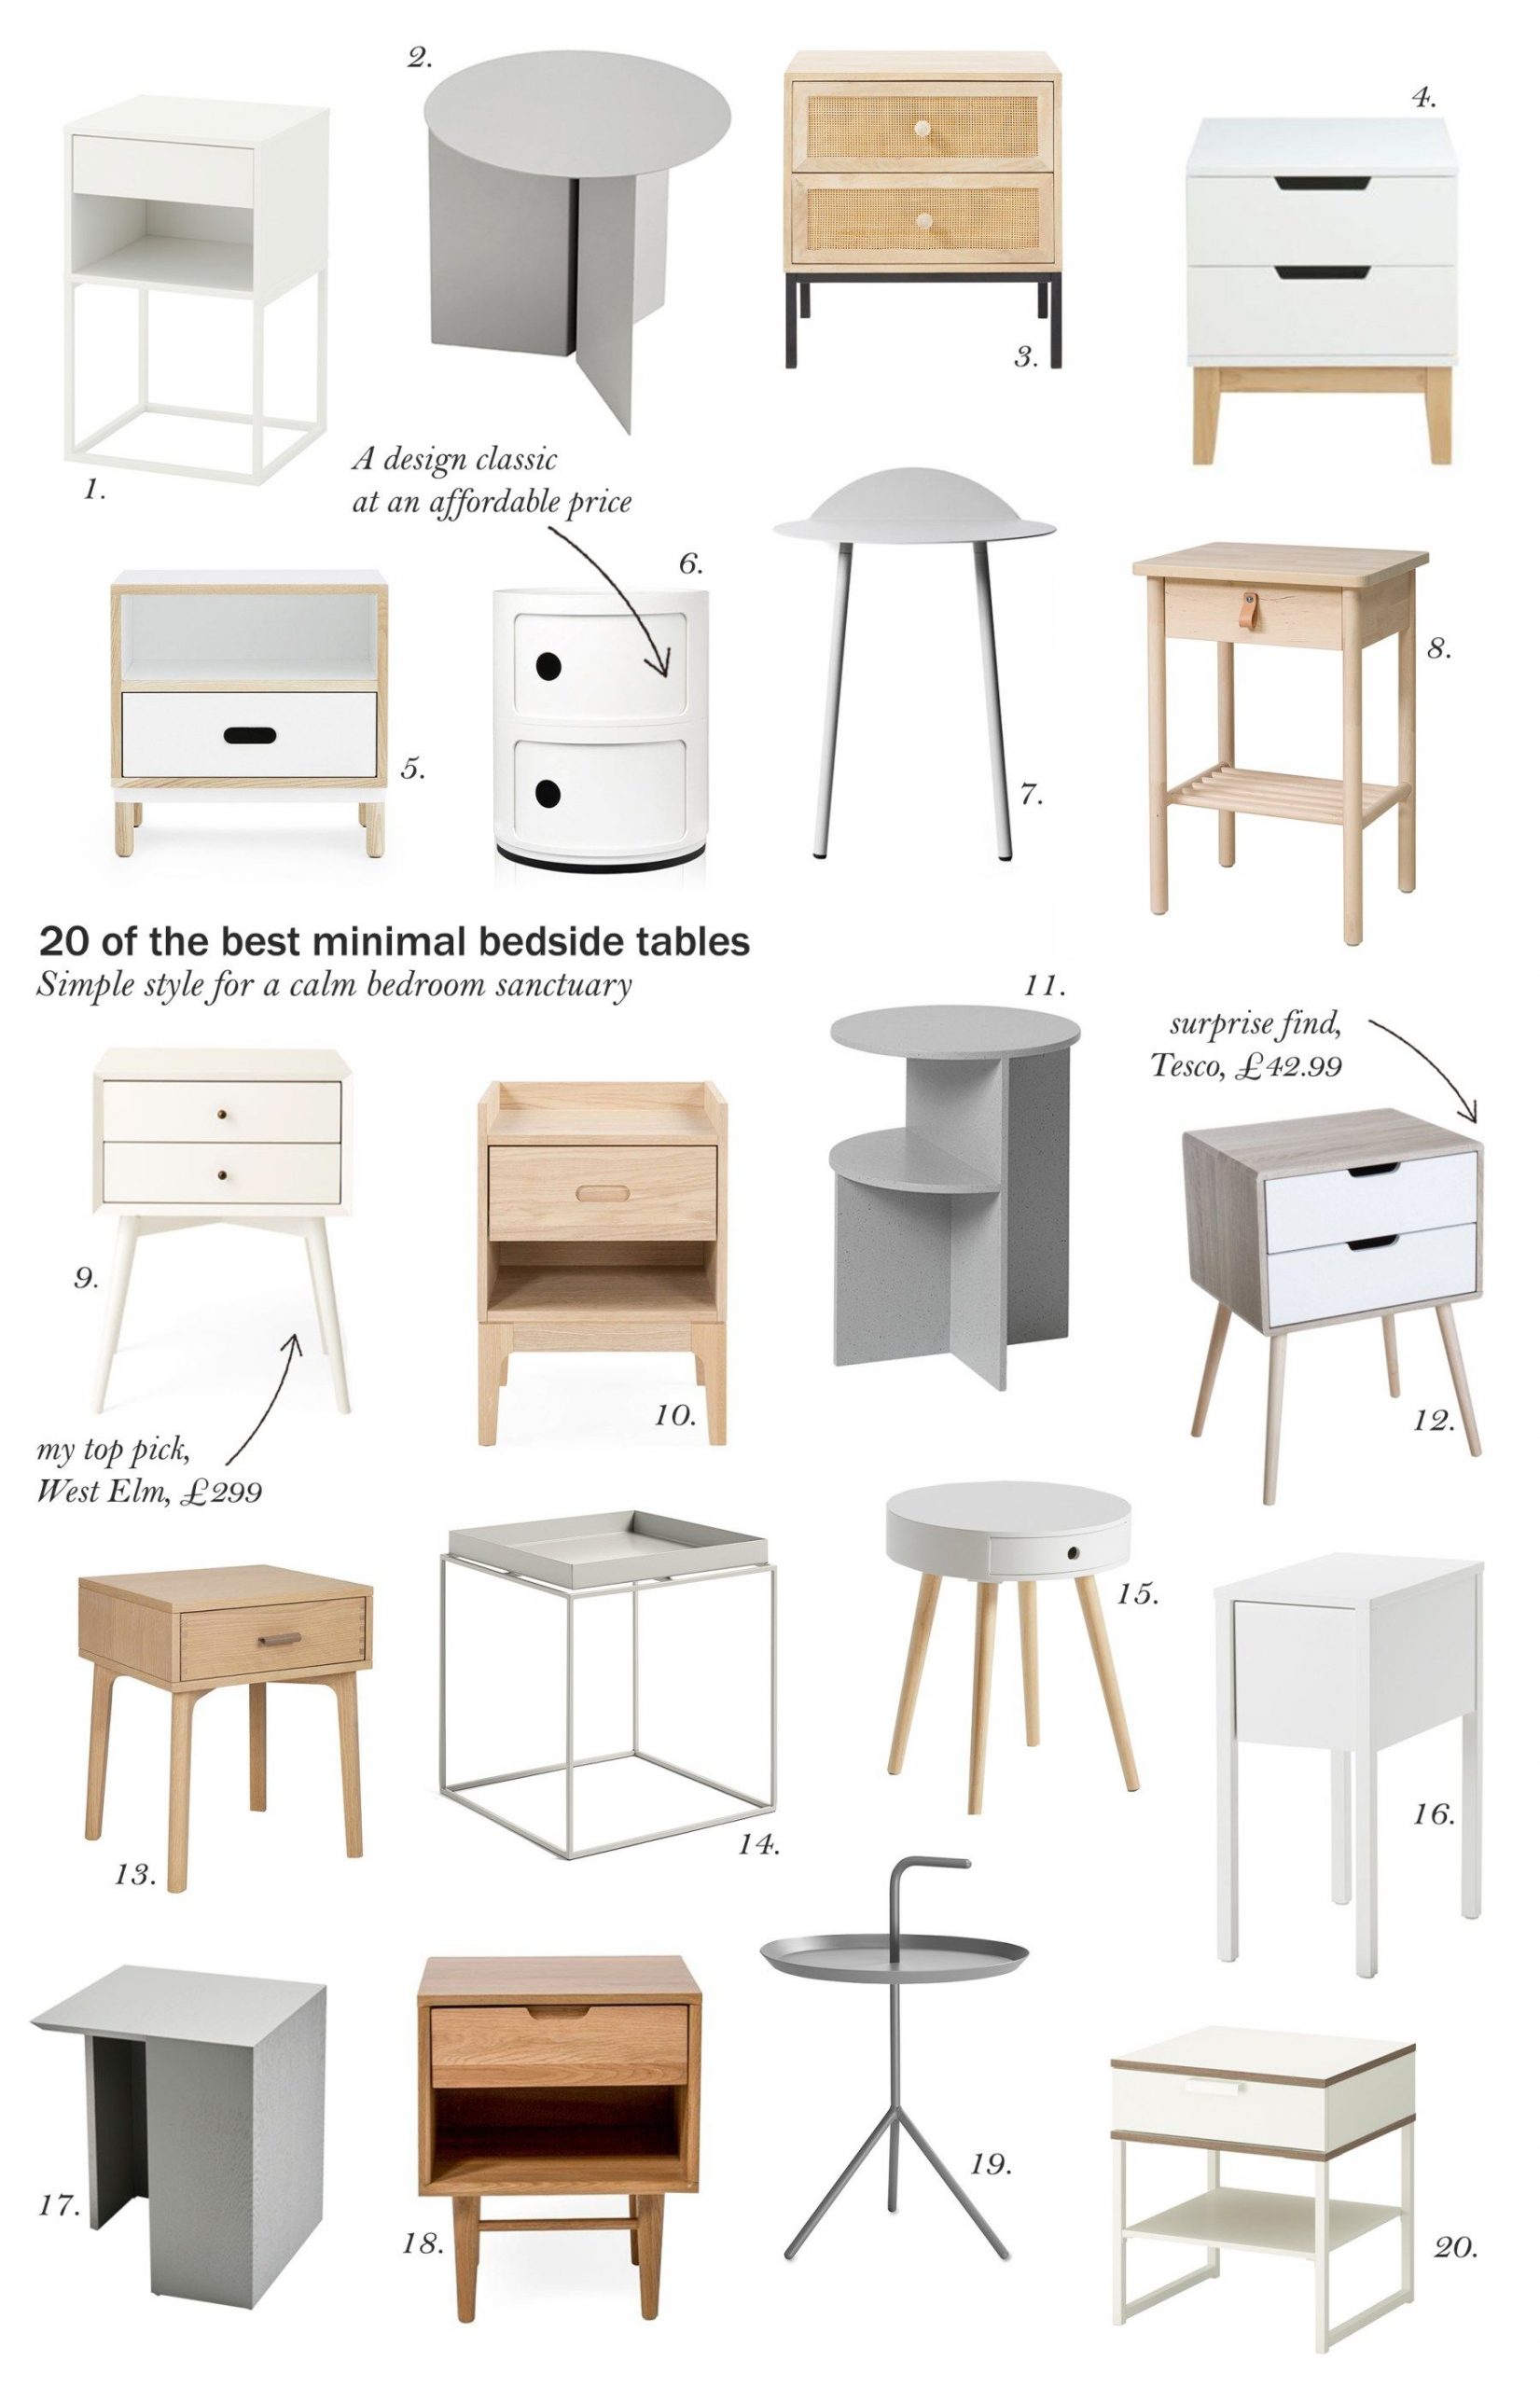 20 of the best minimal, Scandi-style bedside tables – cate st hill